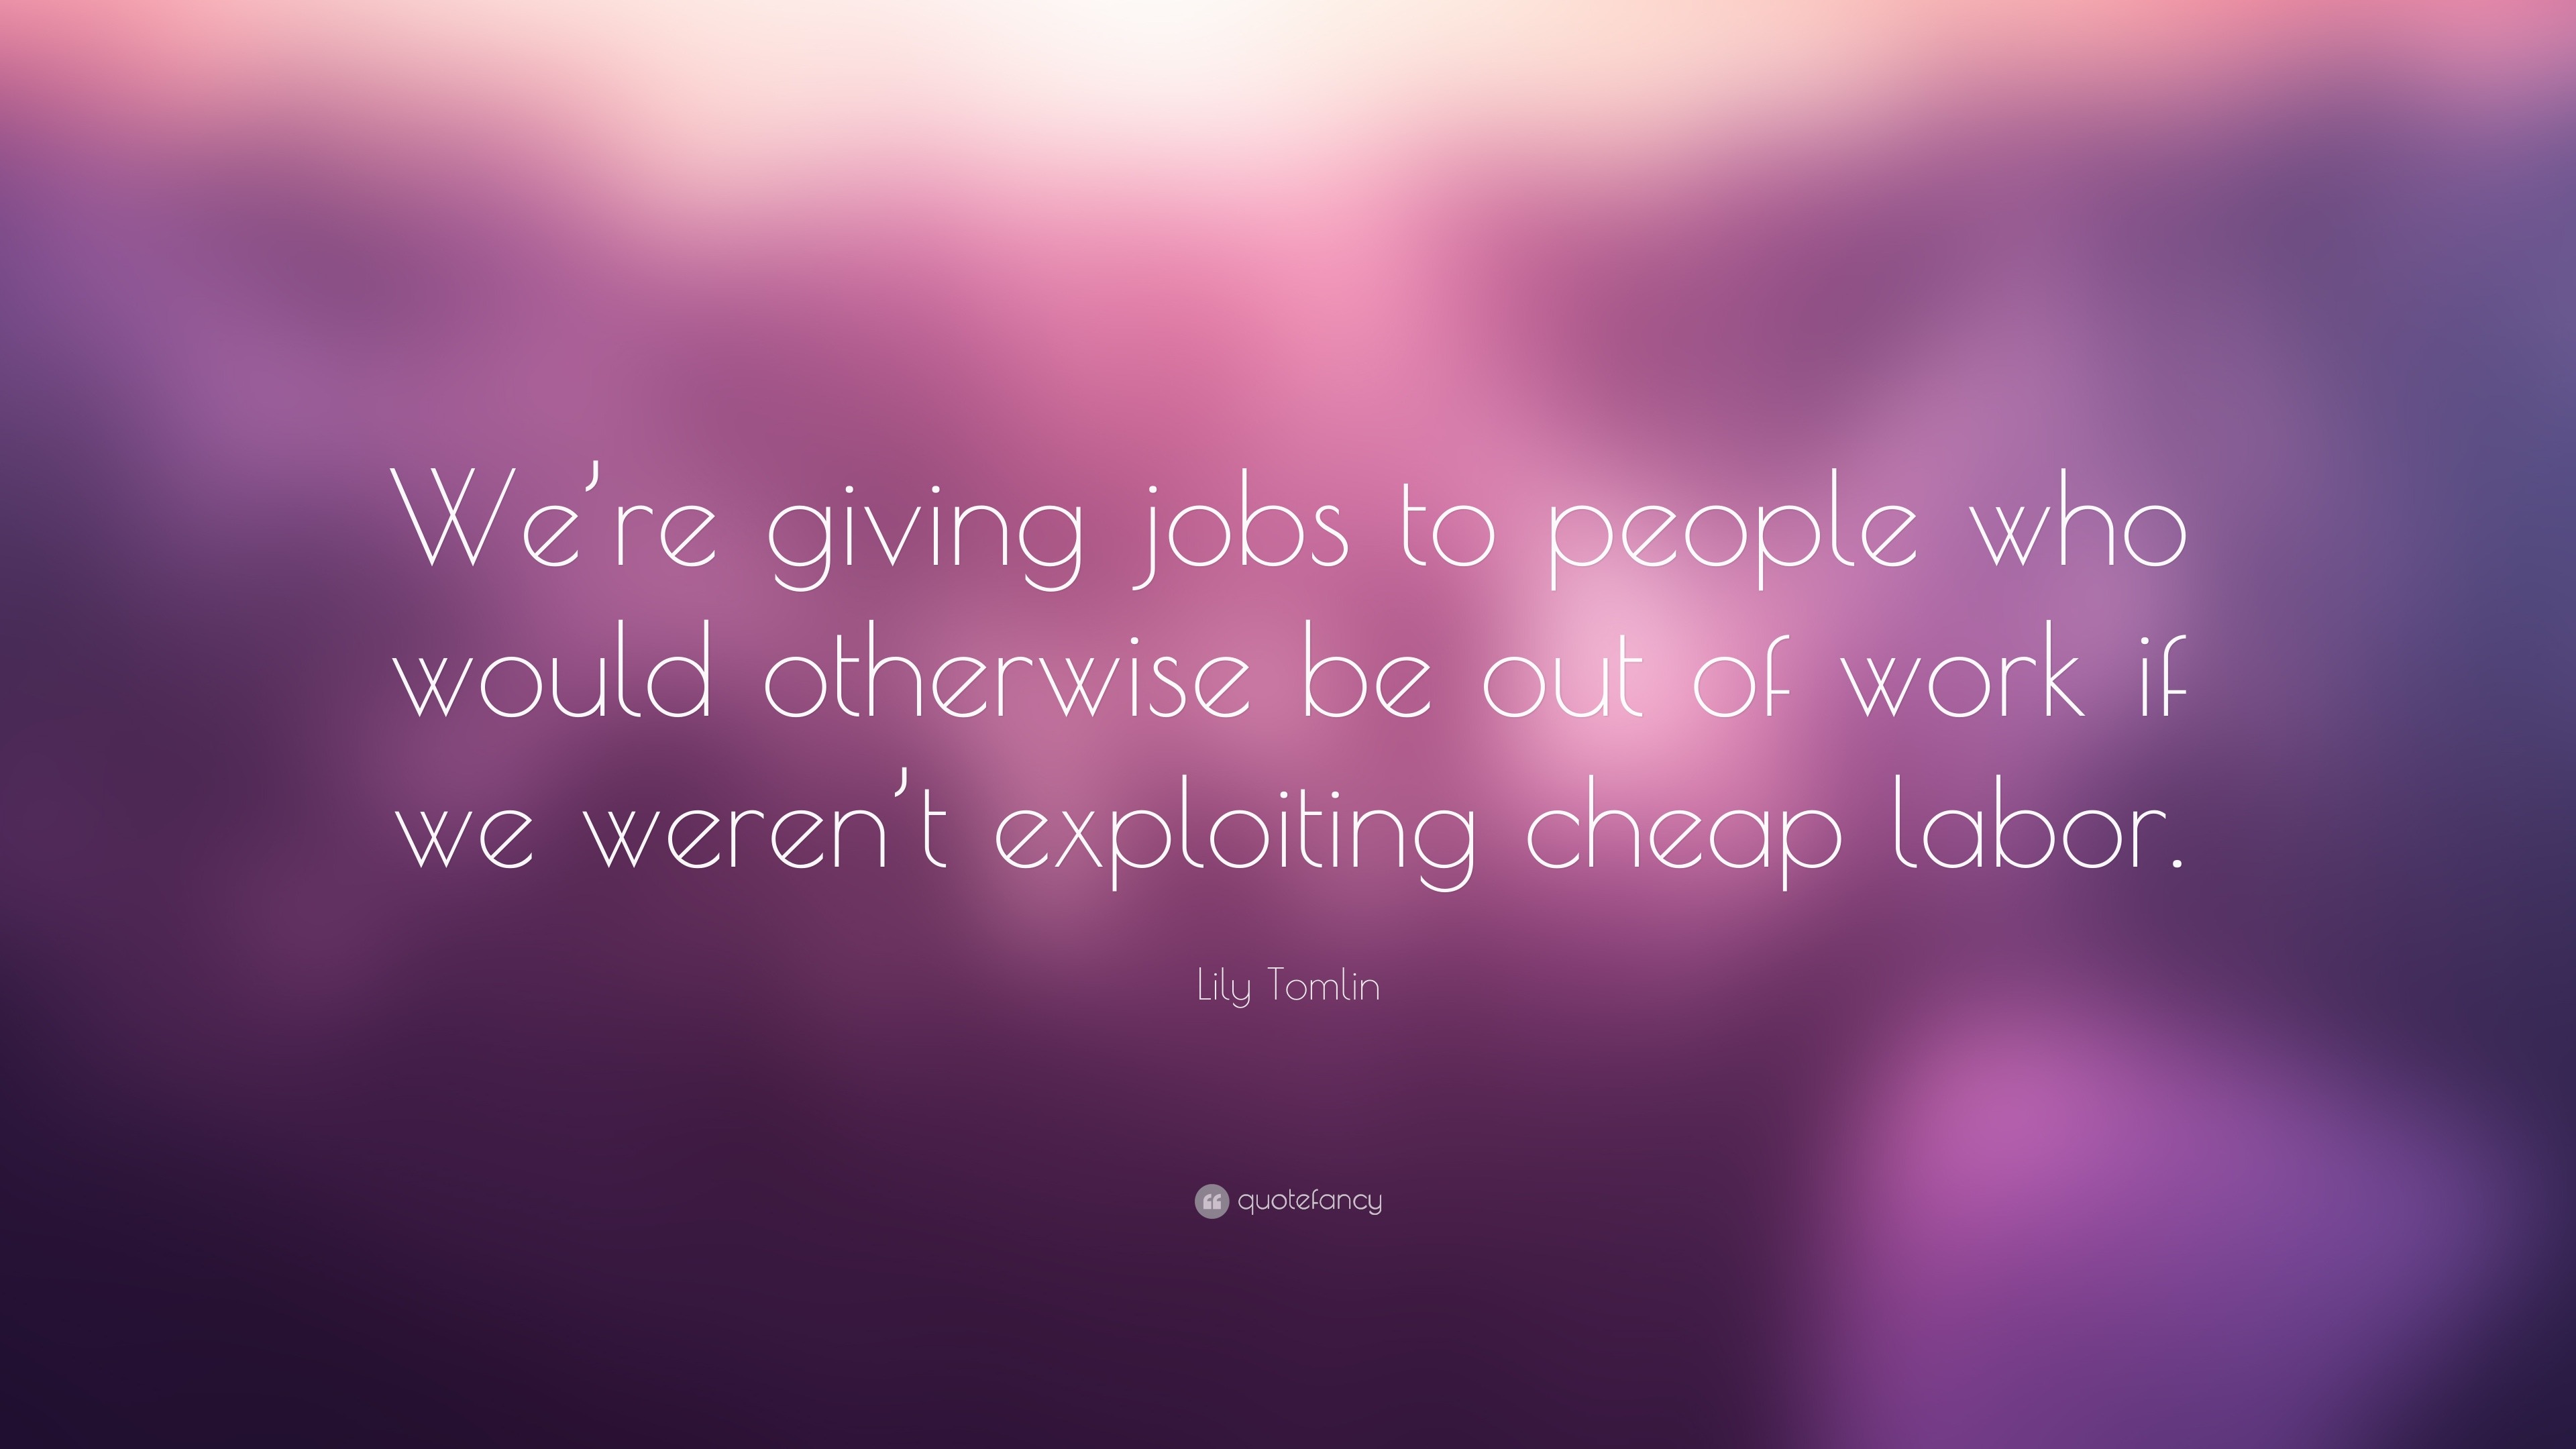 Lily Tomlin Quote: “We’re giving jobs to people who would otherwise be ...